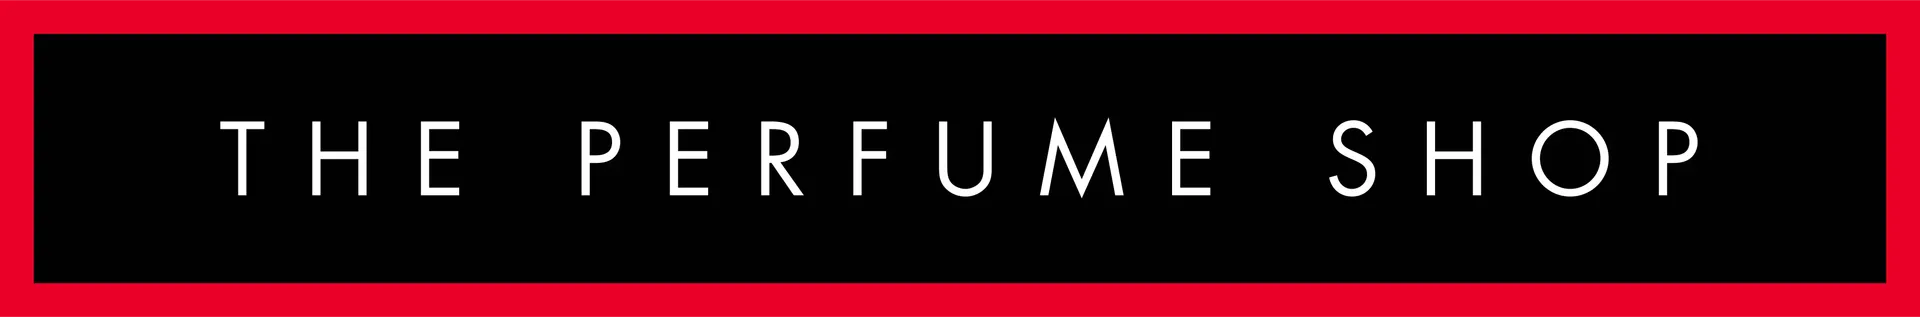 THE PERFUME SHOP logo. Current weekly ad